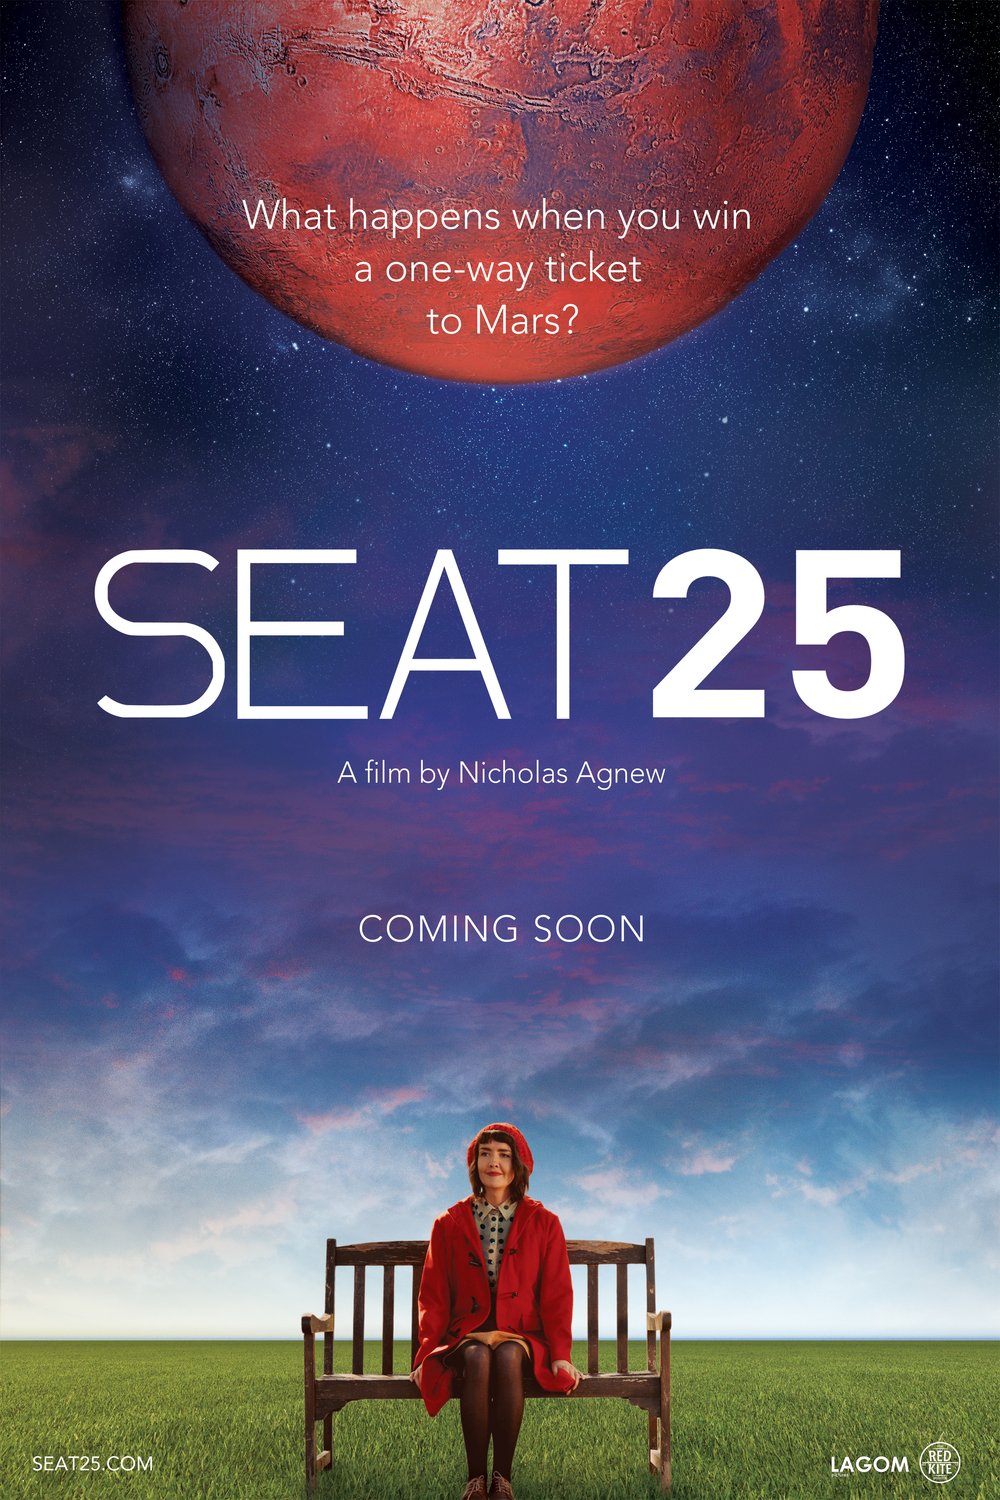 Poster of the movie Seat 25